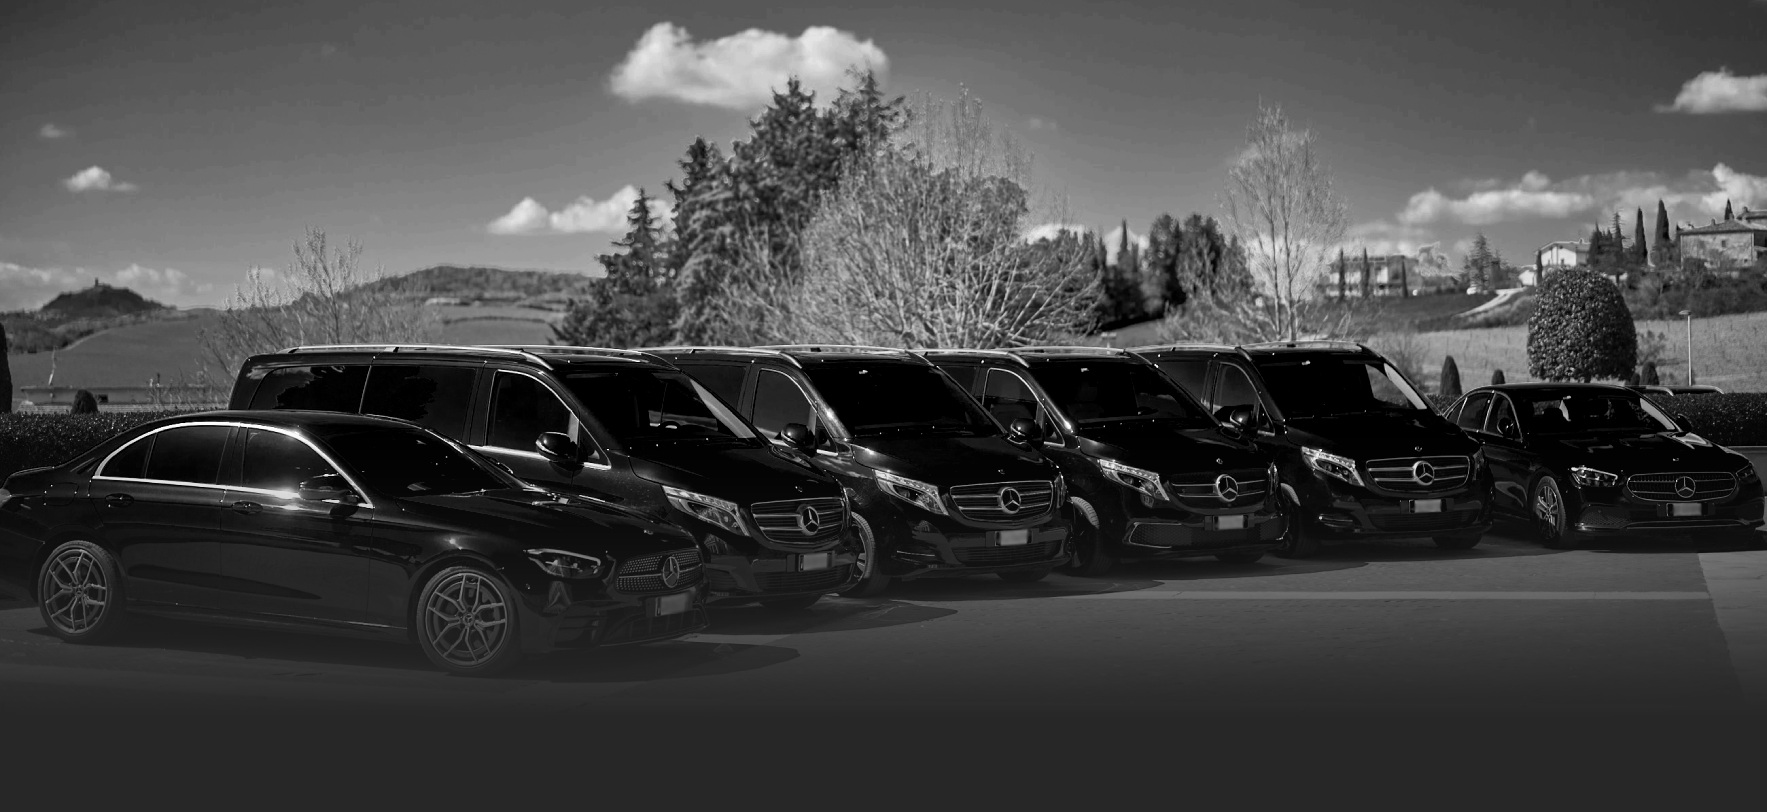 Professional car rental services for any kind of travel and transportation in Italy.